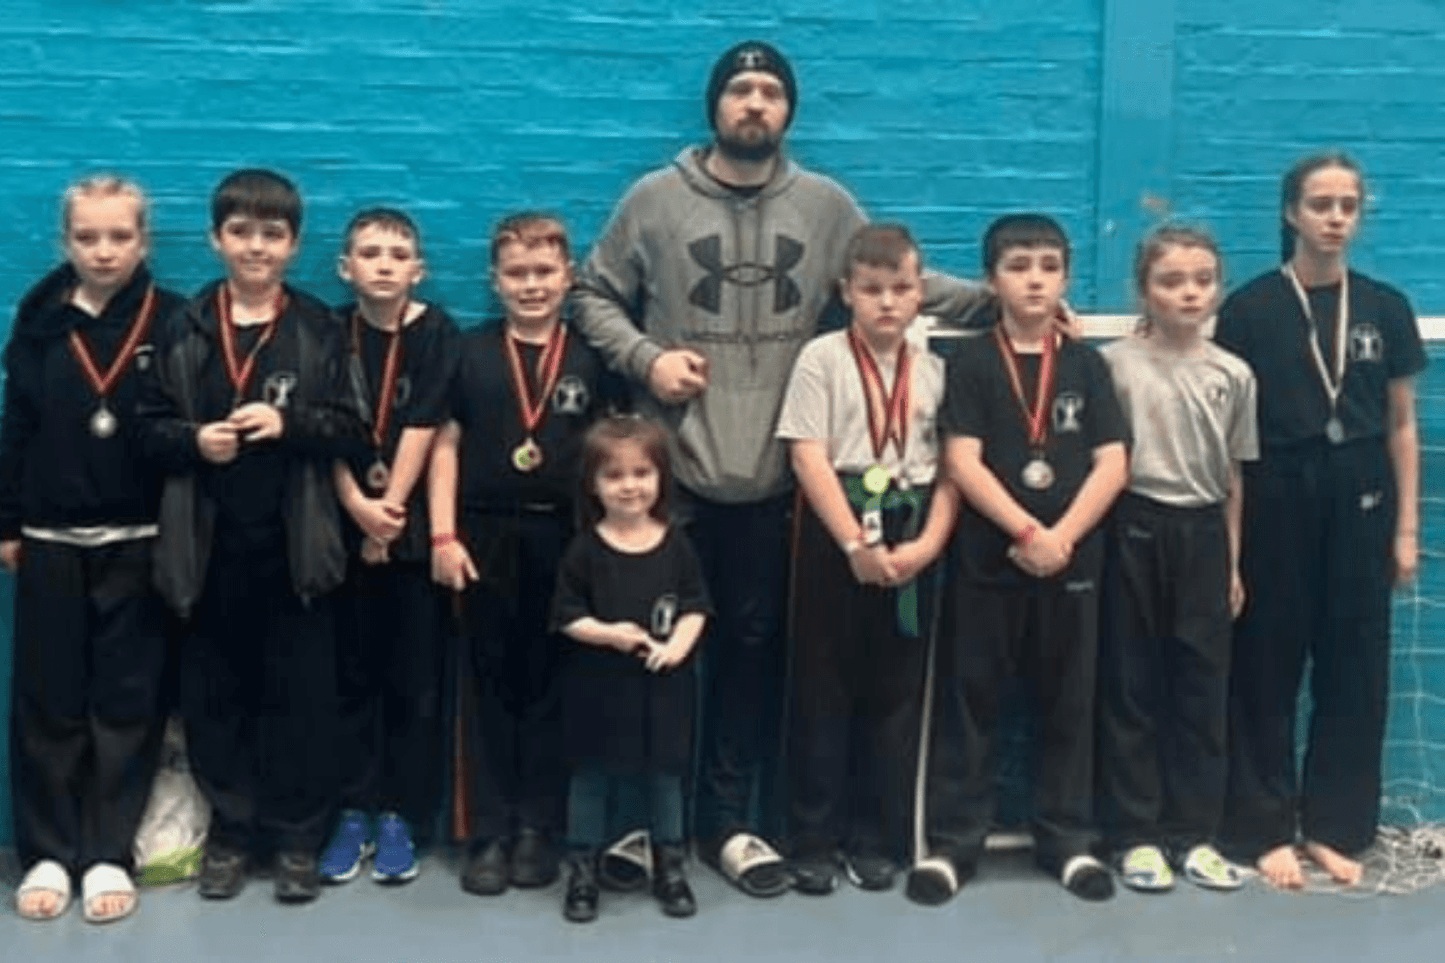 Junior Advanced Kick Boxing | 2 Day Per Week | Pay Monthly - Karma Martial Arts